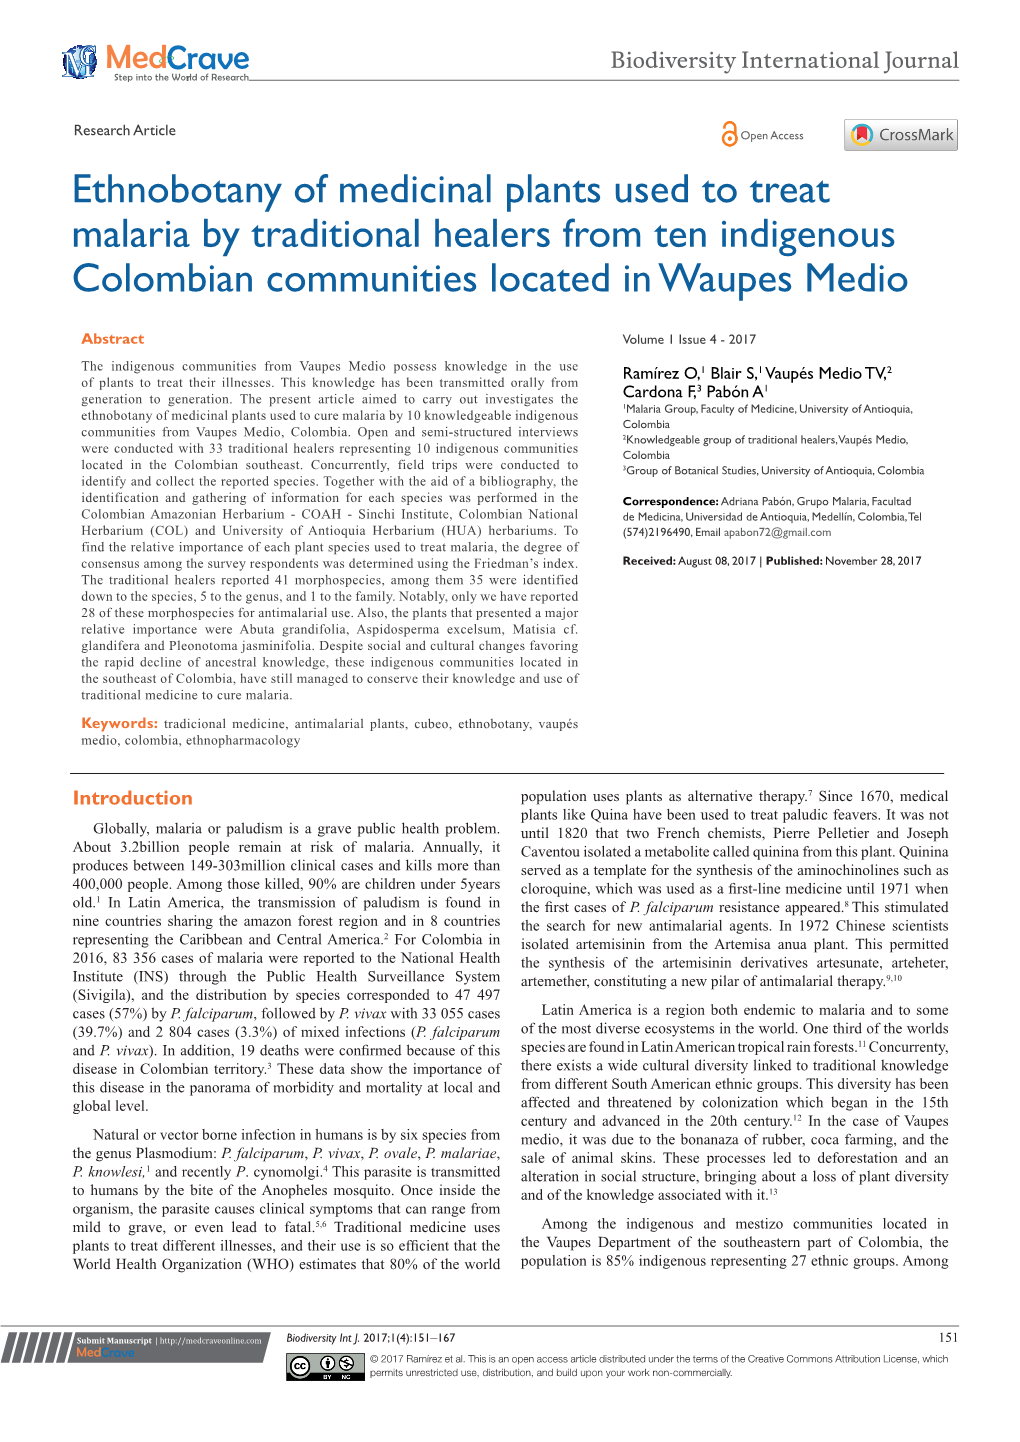 Ethnobotany of Medicinal Plants Used to Treat Malaria by Traditional Healers from Ten Indigenous Colombian Communities Located in Waupes Medio